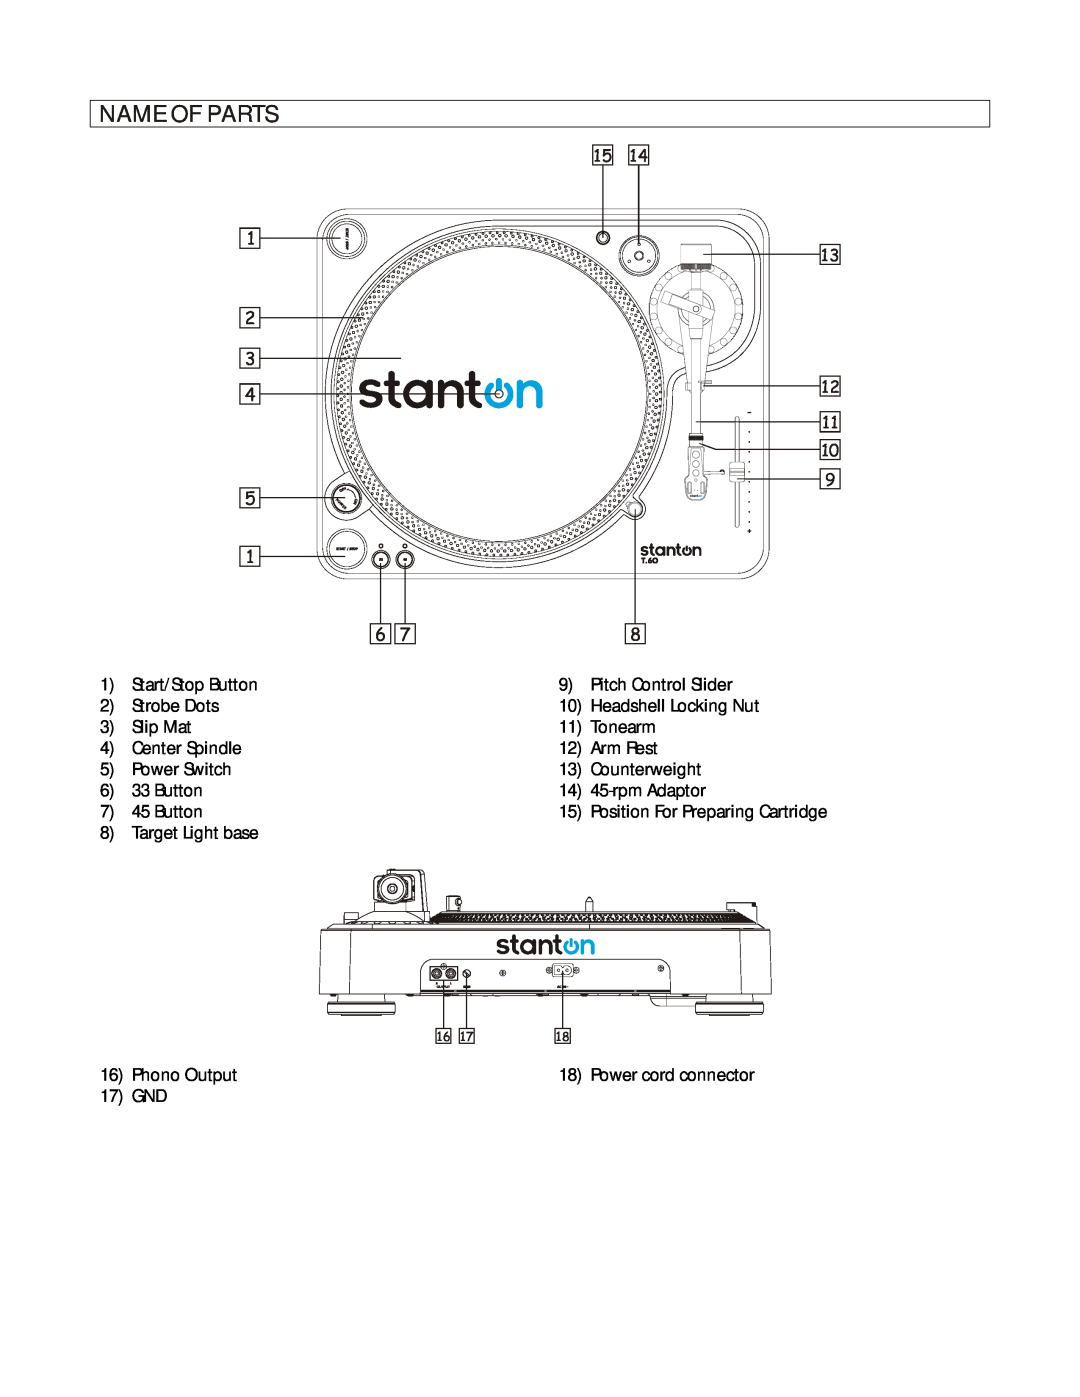 Stanton T.60 Name Of Parts, 1Start/Stop Button 2Strobe Dots 3Slip Mat, 4Center Spindle 5Power Switch 633 Button, 1514 13 